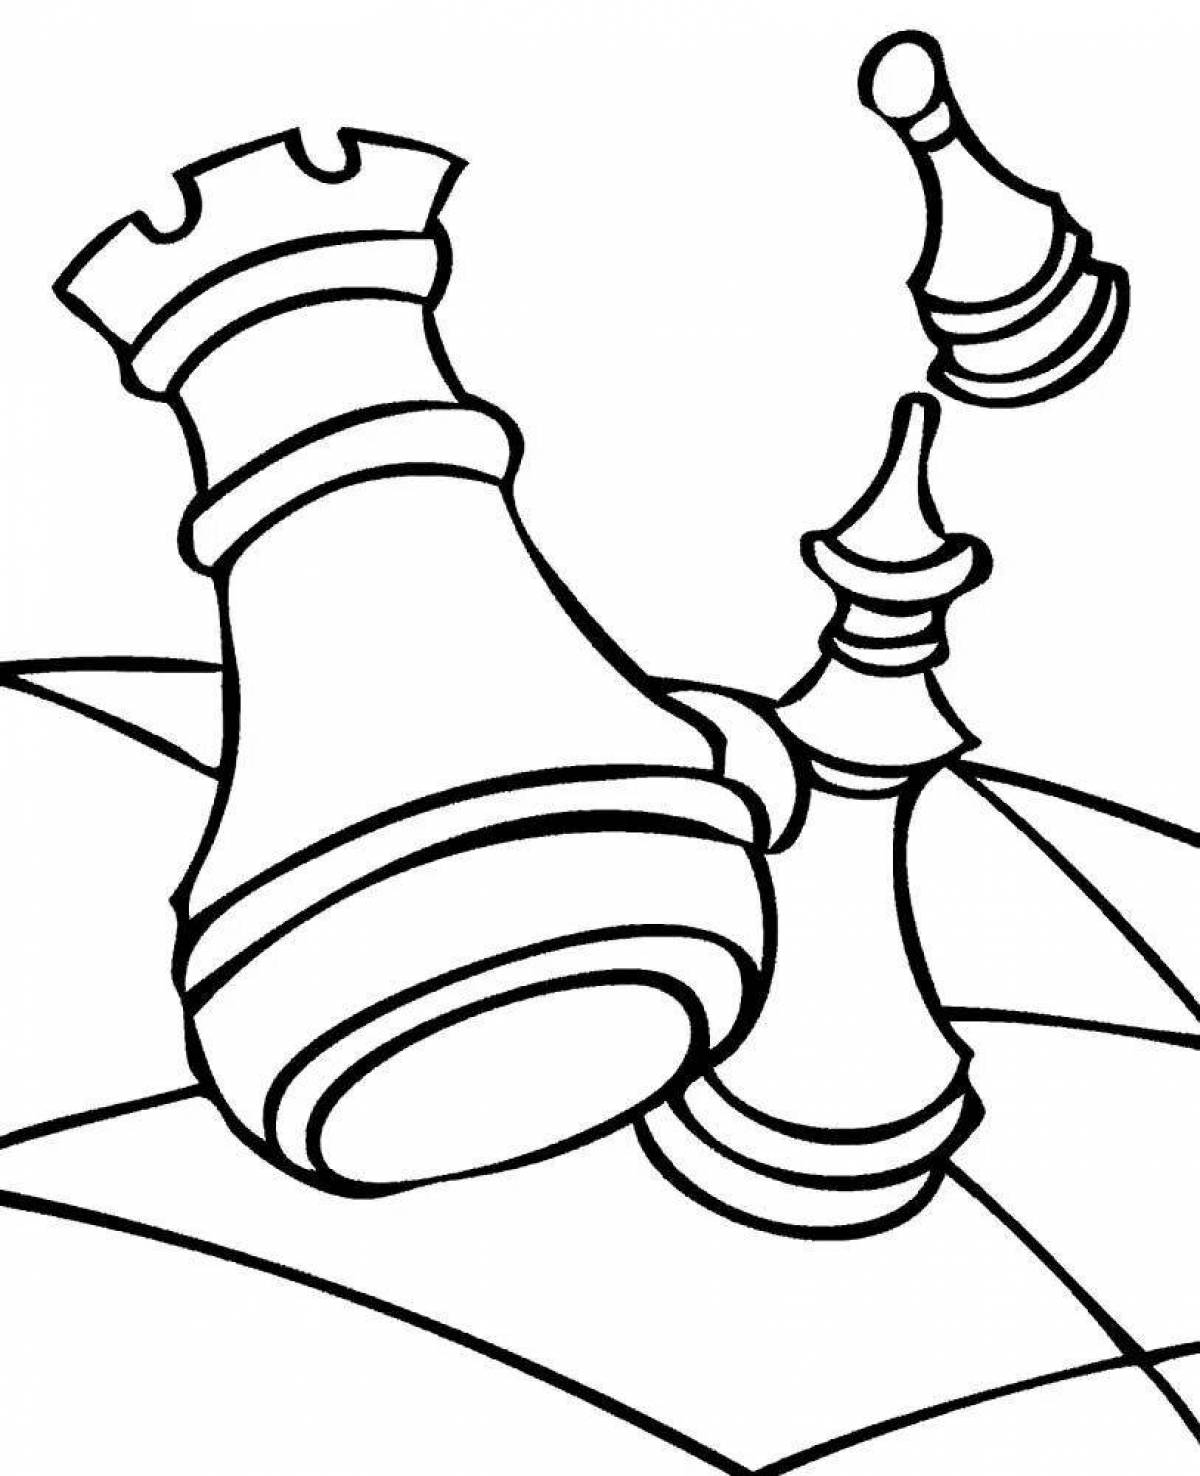 Funny chess pieces coloring for kids